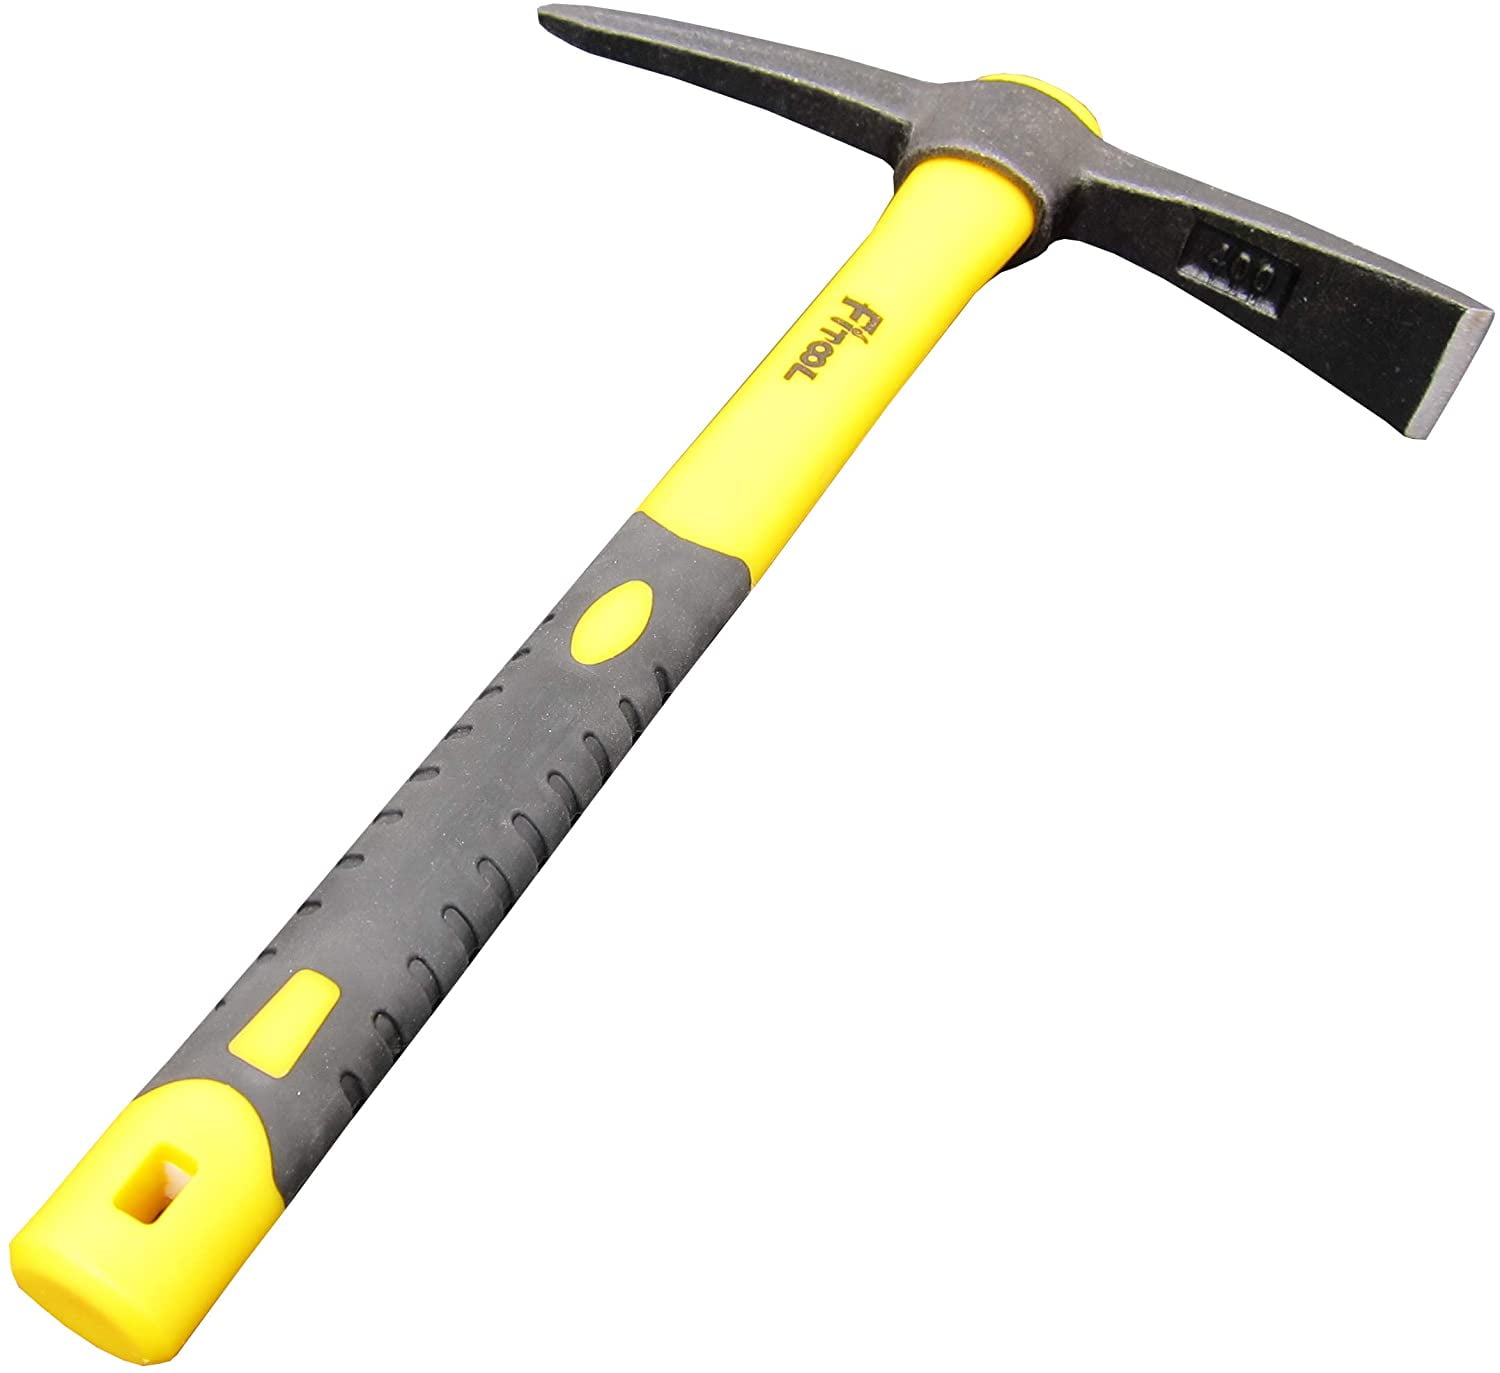 STEEL COMBINED AXE & ADZE MATTOCK DIGGER CAMPING TOOL HIKING HUNTING HEAD ONLY. 